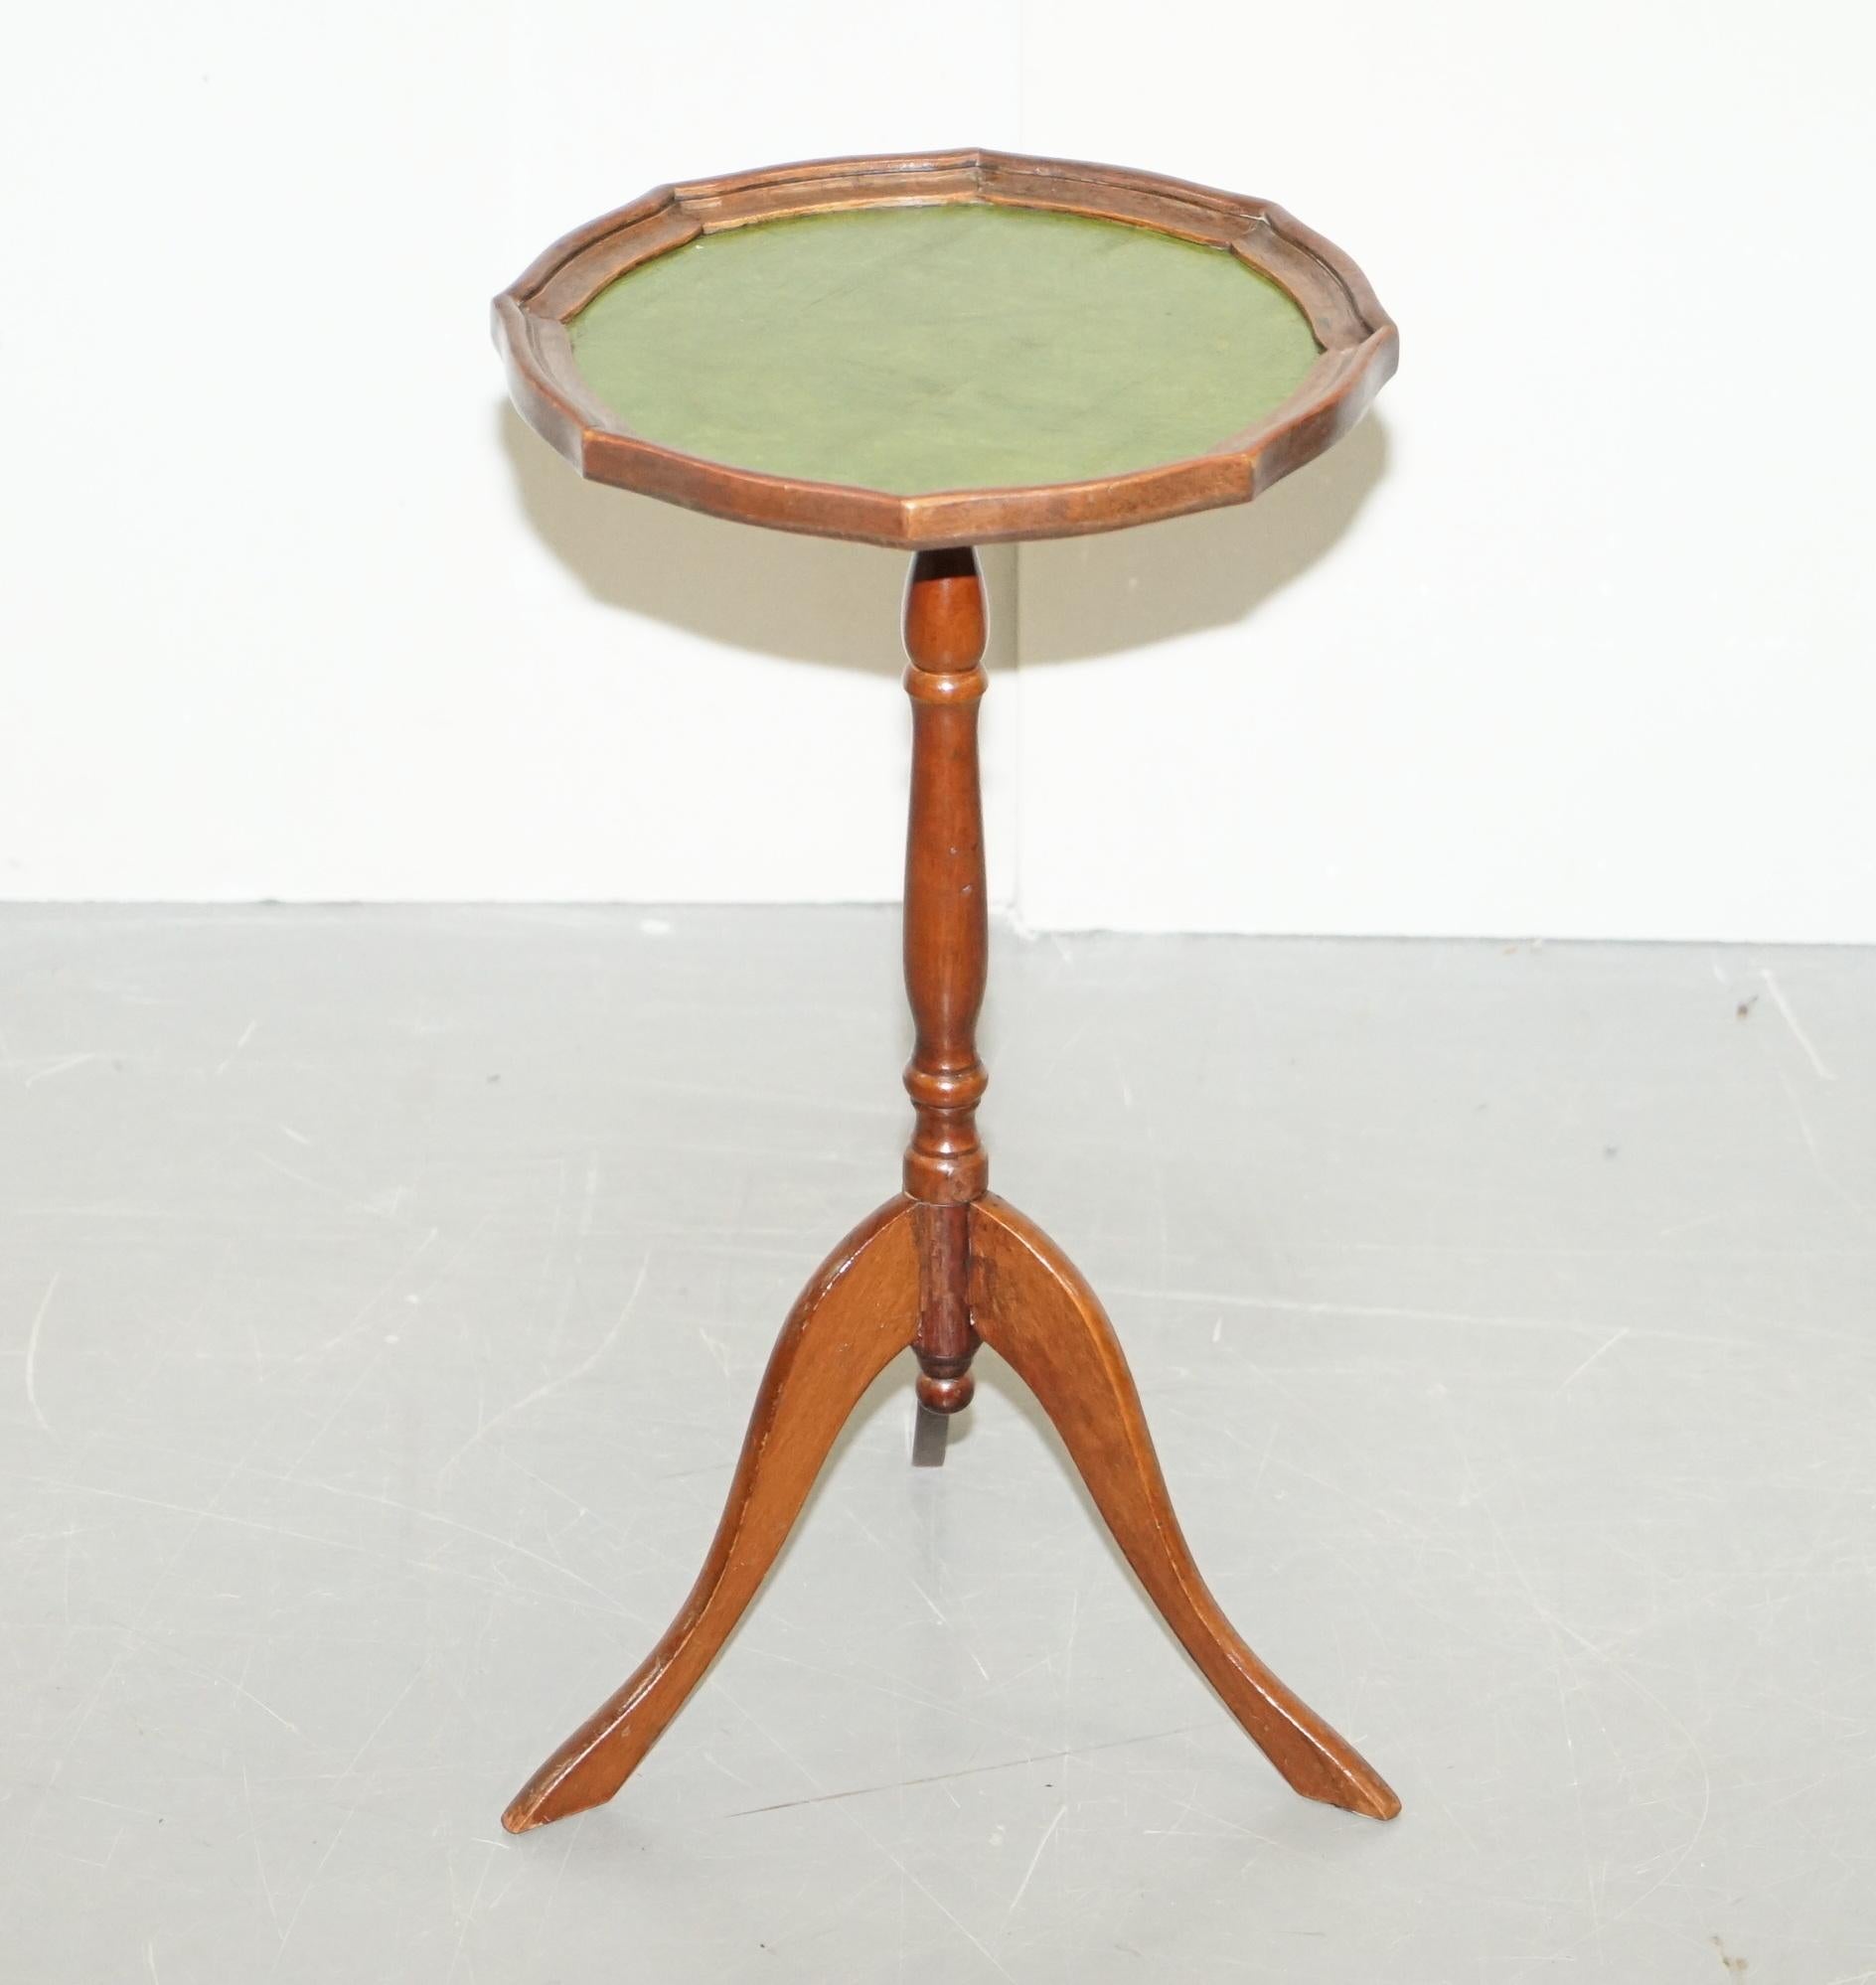 We are delighted to offer for sale this lovely Bevan Funell vintage light Mahogany with green leather top lamp or side table

A good looking well made tripod table in good, we have cleaned waxed and polished it from top to bottom, there will be